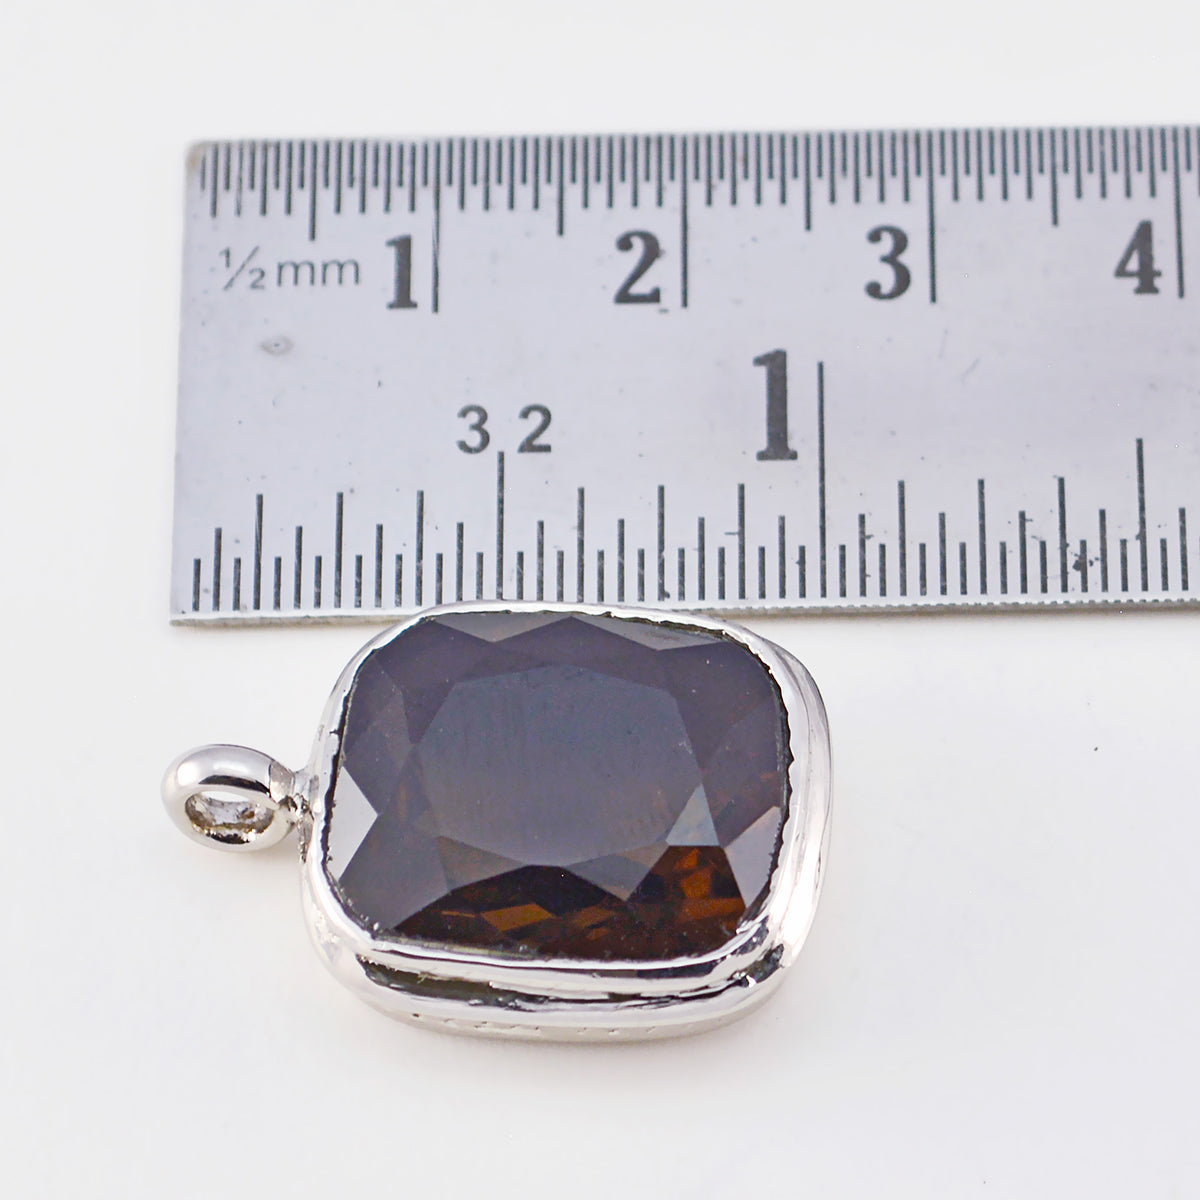 Riyo Genuine Gems Octogon Faceted Brown smoky quartz 925 Sterling Silver Pendants gift for daughter's day